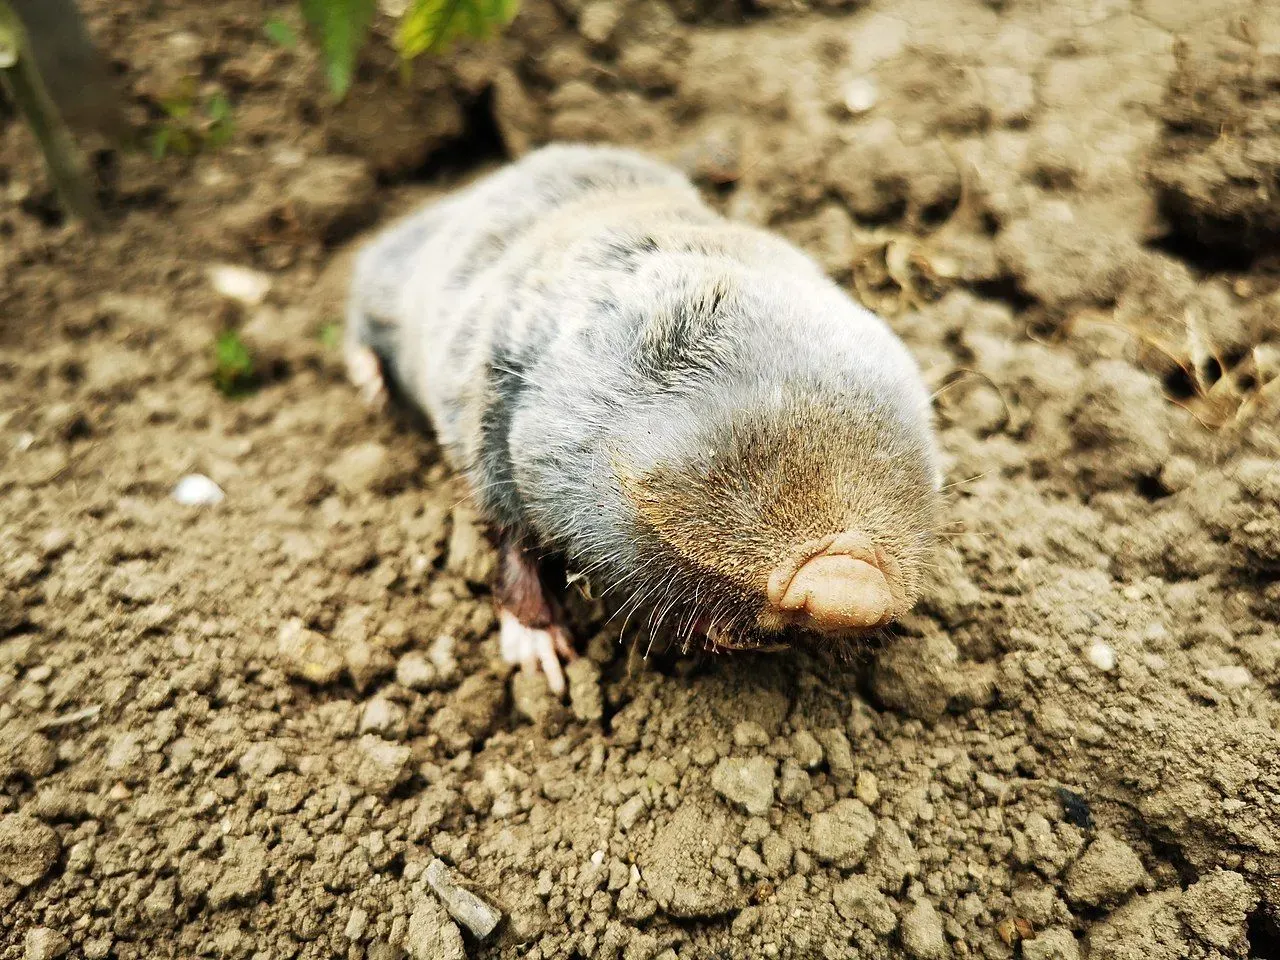 Lesser mole rats are largely underground animals and relatively small in size.